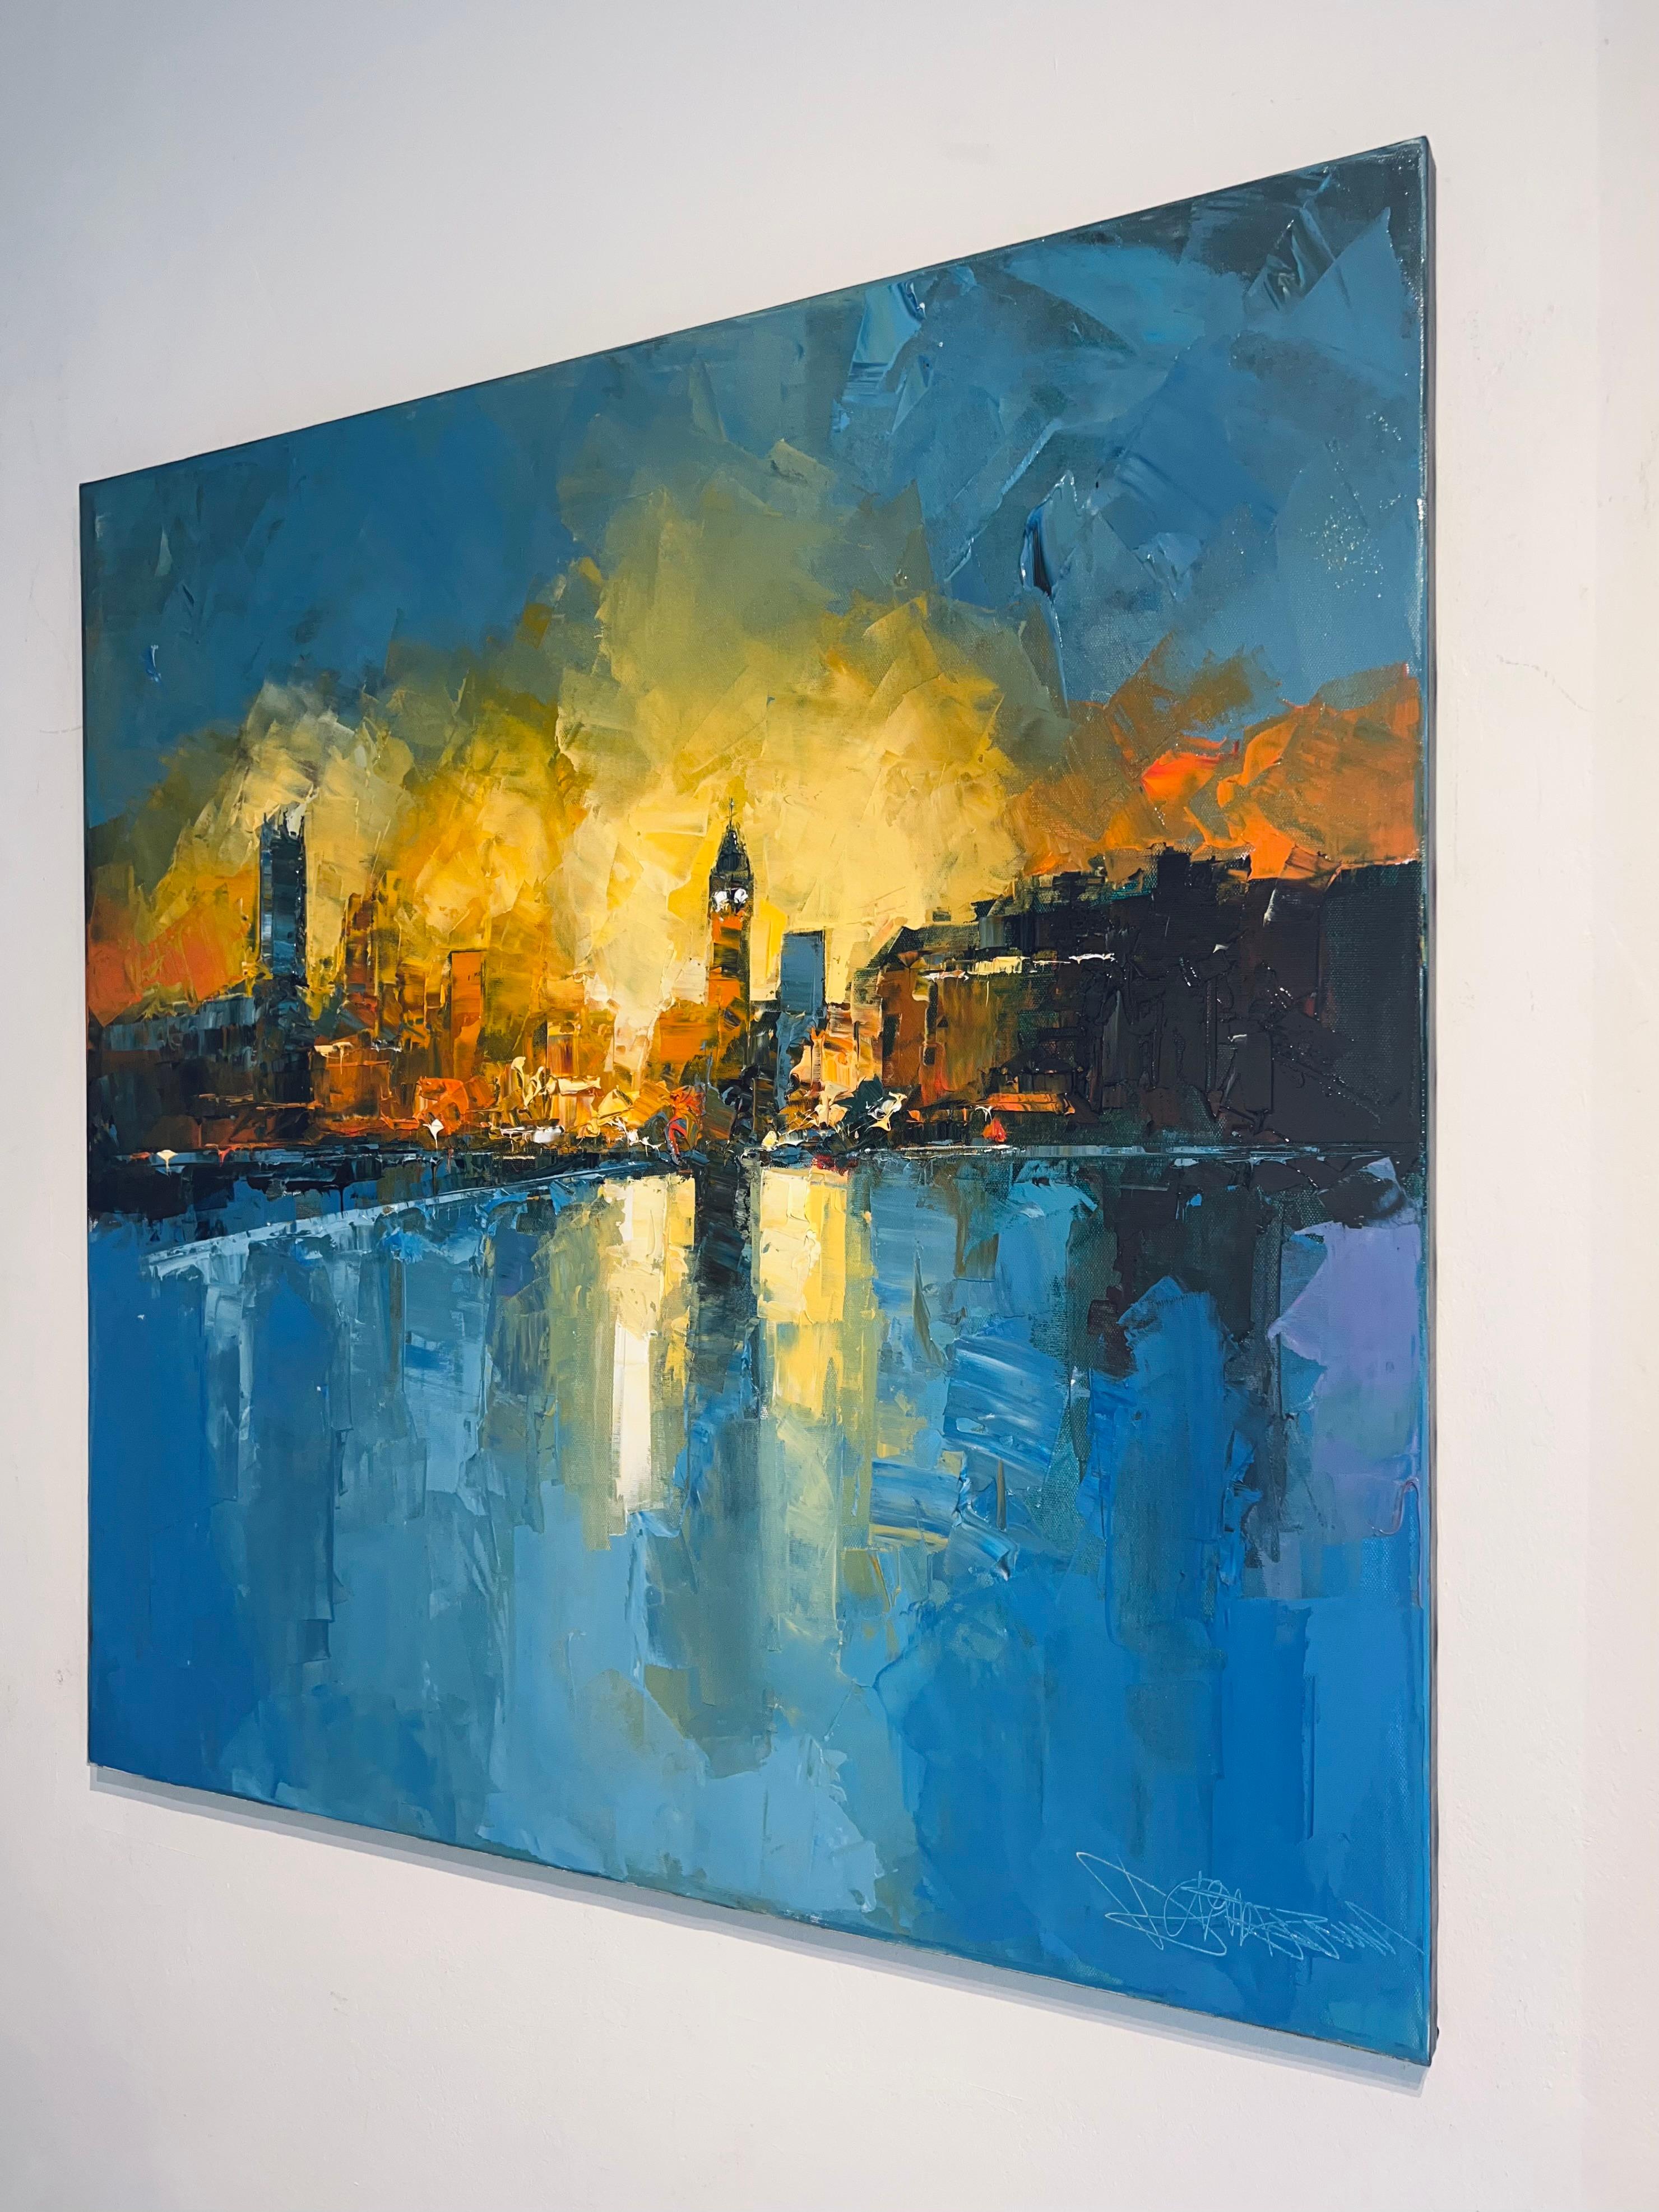 Abstract Elegance of Big Ben-original London cityscape painting-Contemporary Art - Painting by Daniel Castan